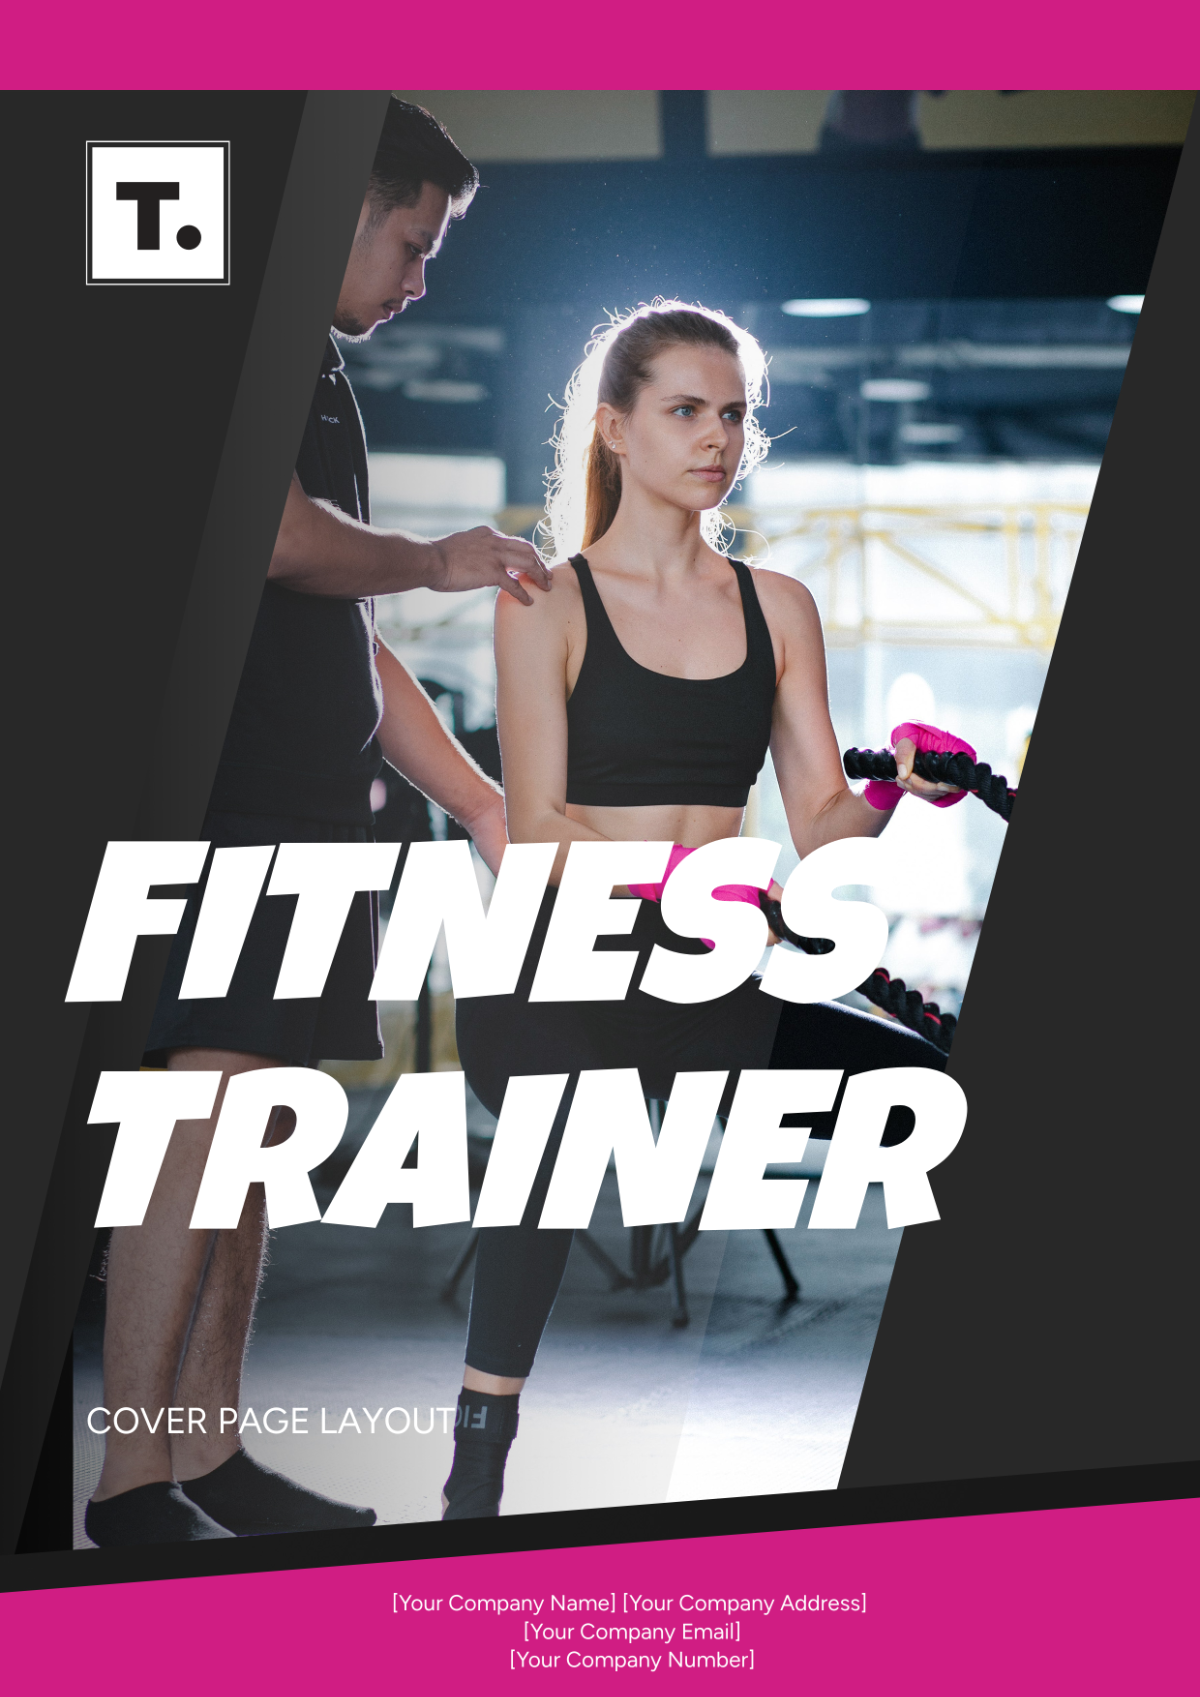 Fitness Trainer Cover Page Layout